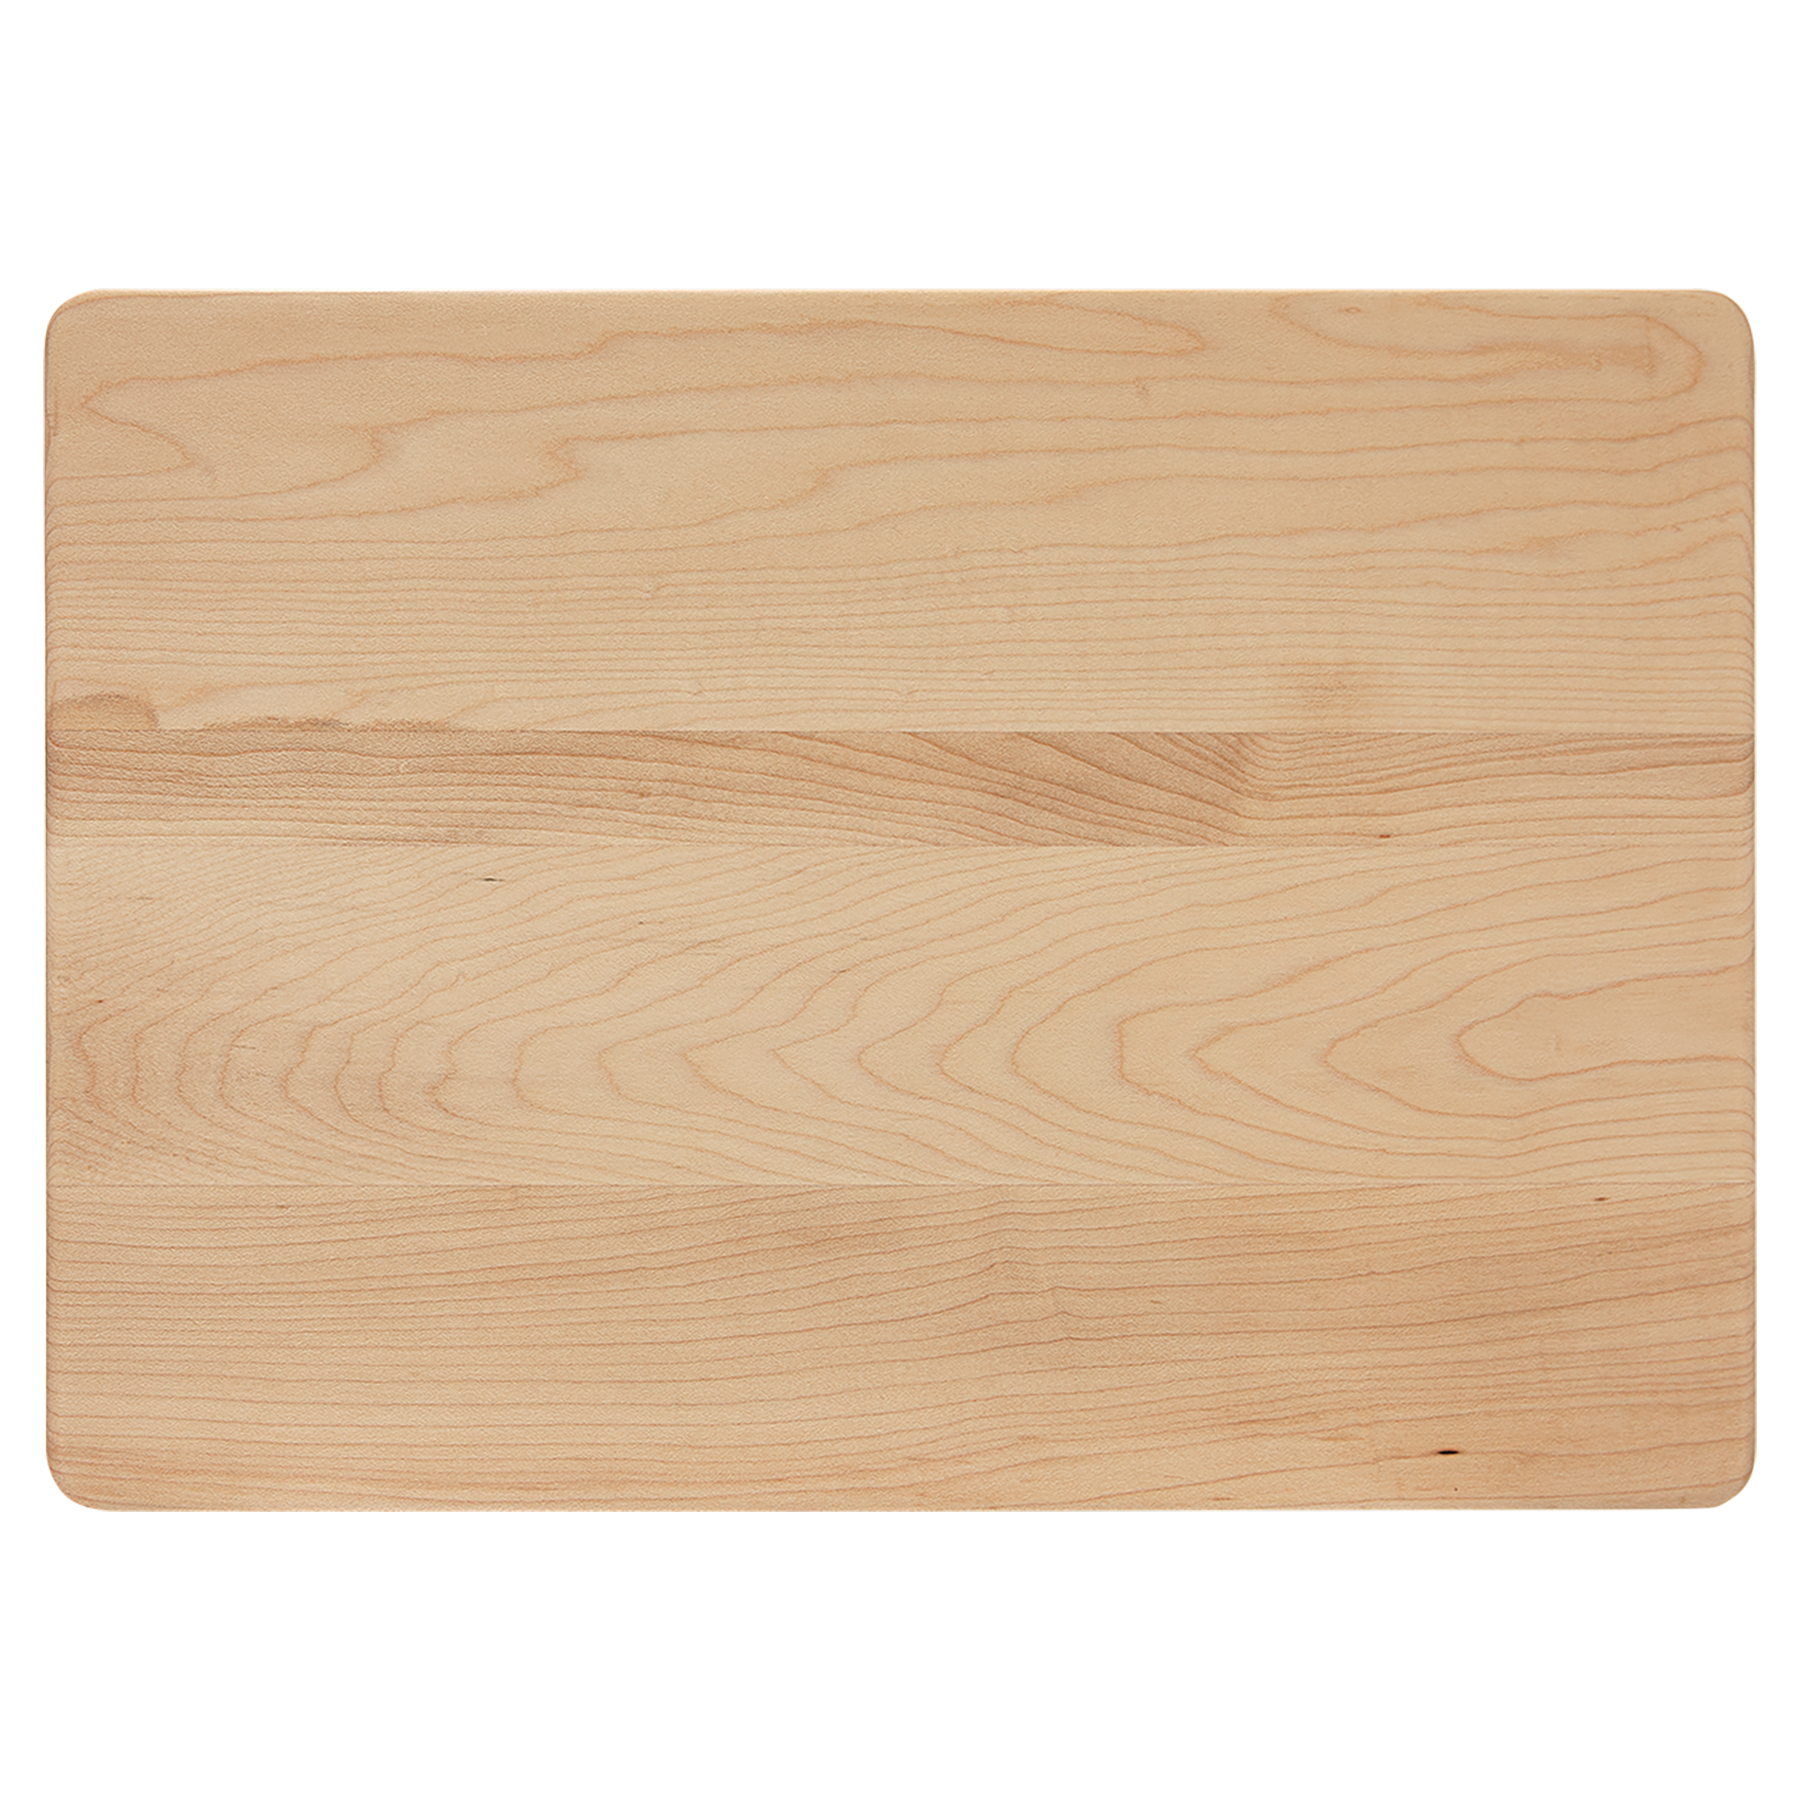 13 3/4" x 9 3/4" Maple Cutting Board with Drip Ring